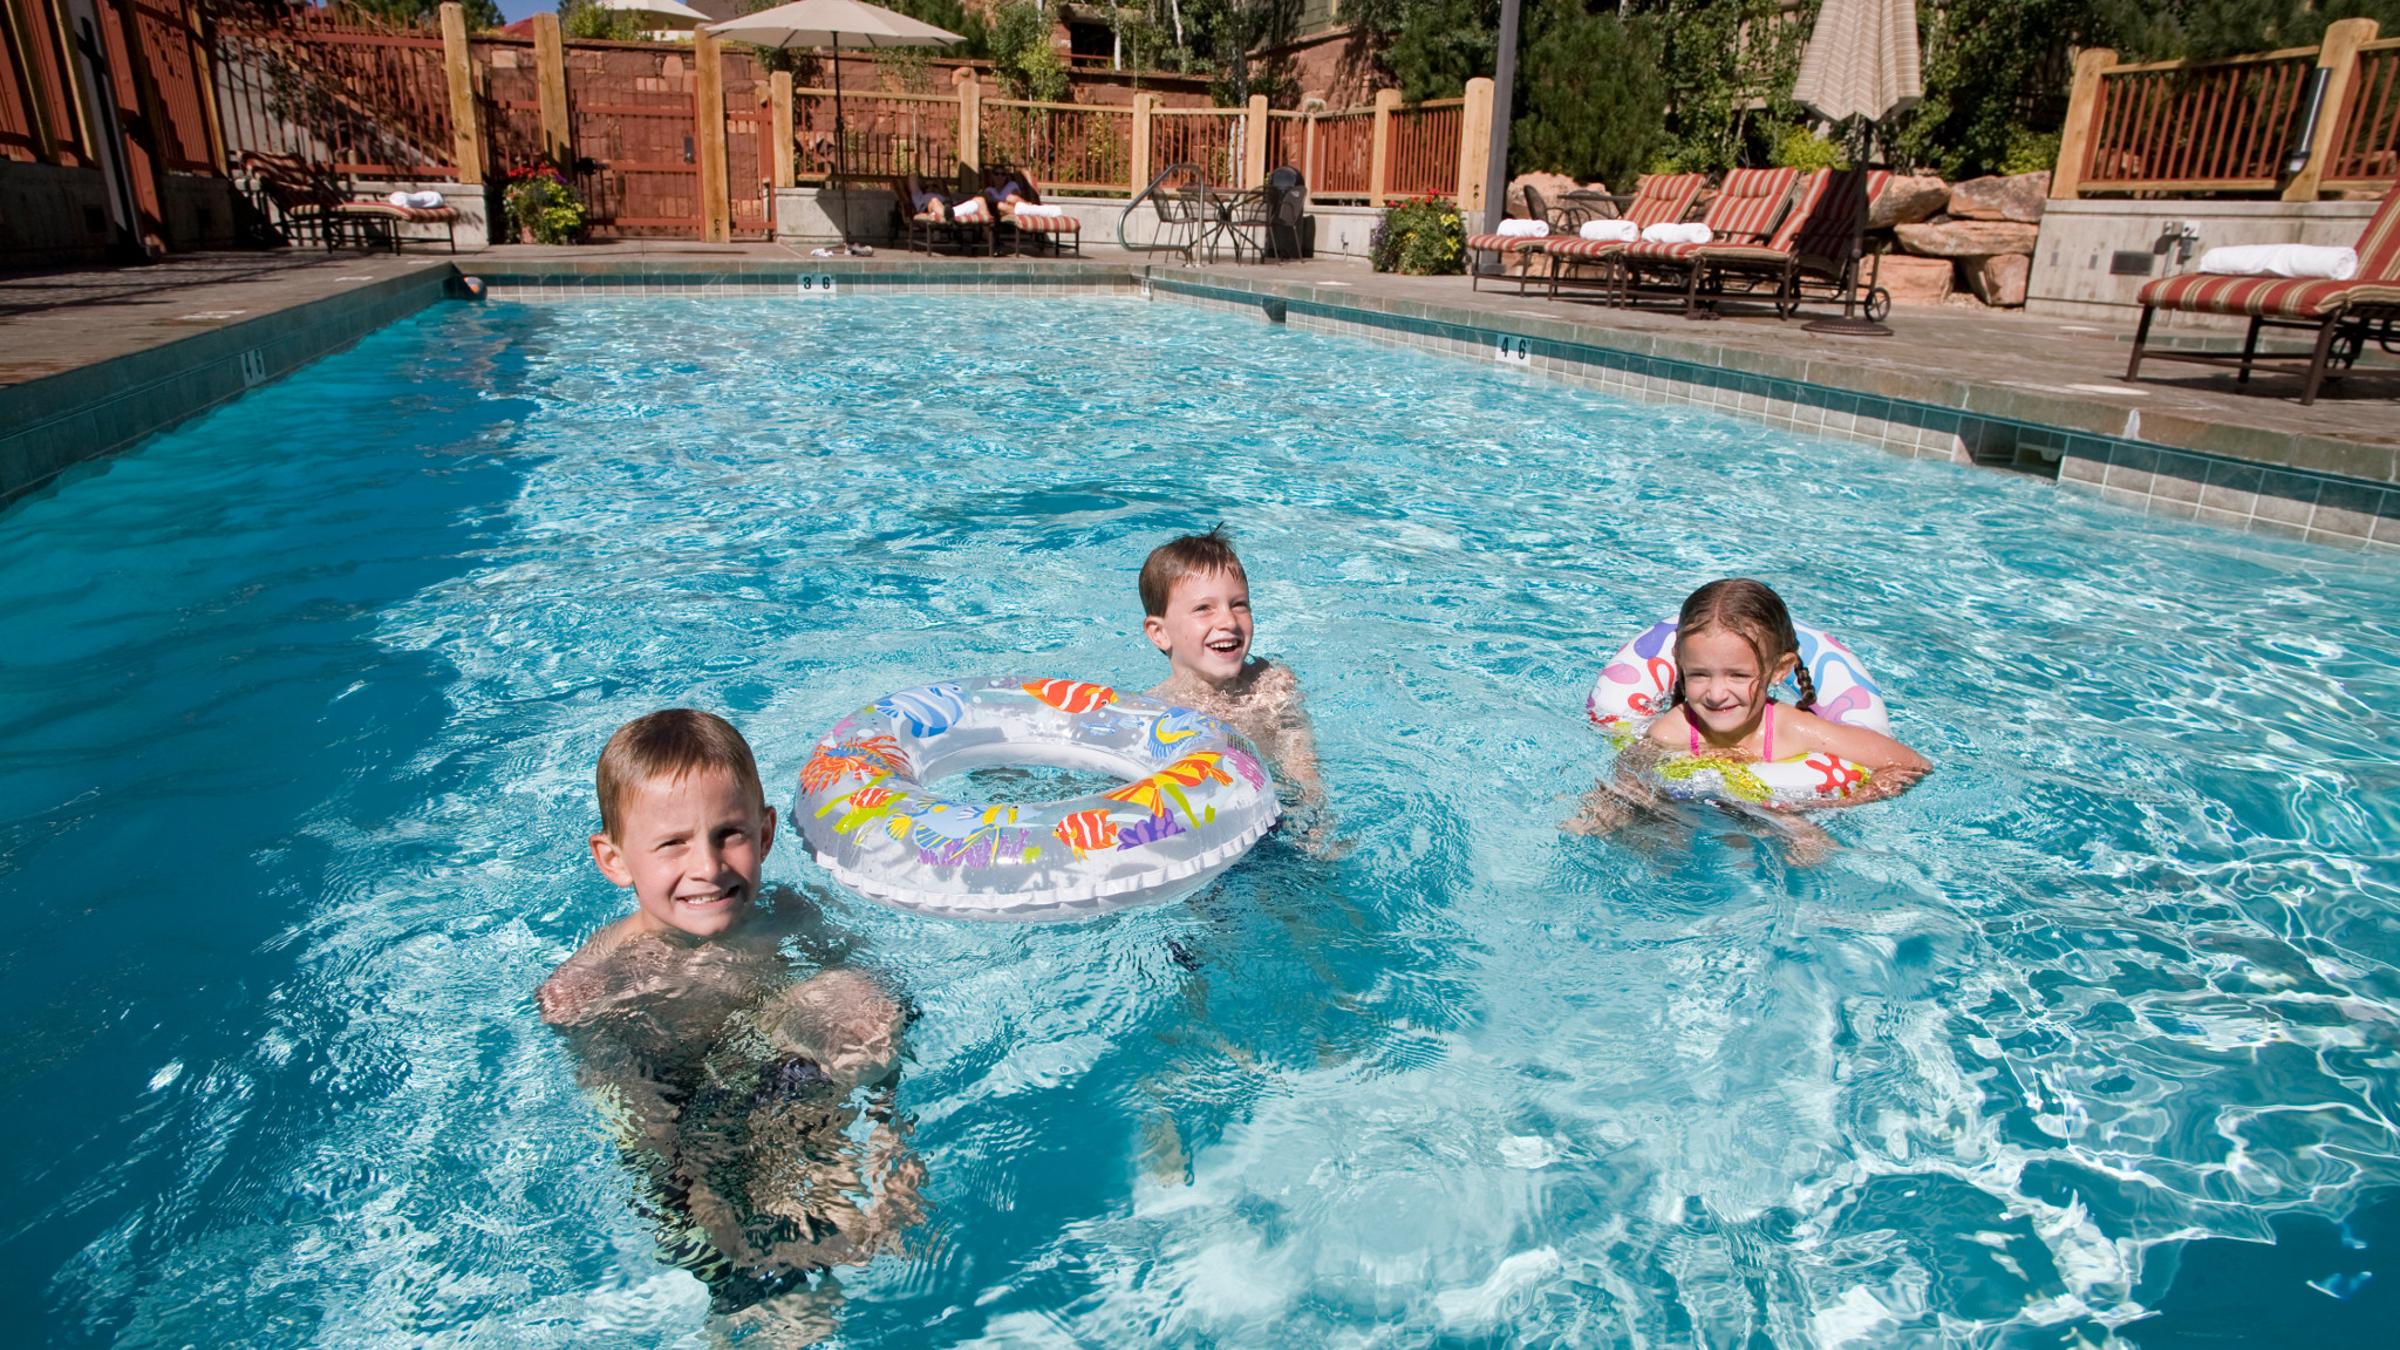 Kids in the pool at the Lodges at Deer Valley